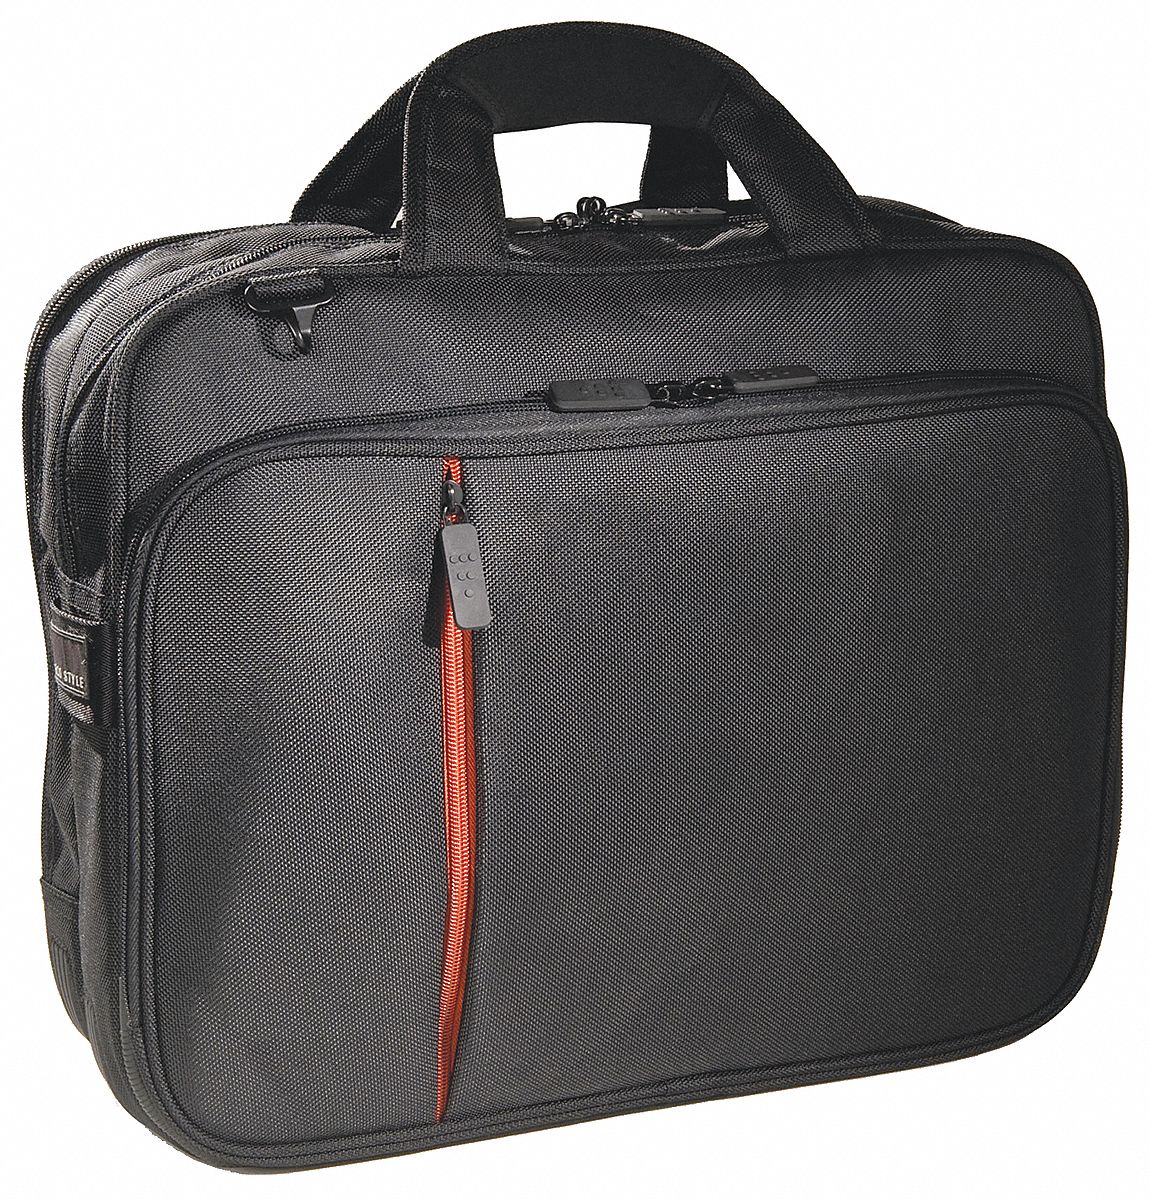 Laptop Case: Fits Up to 15.6 in Laptop, 1680D Ballistic Nylon, 16 1/2 in Lg, 13 in Wd